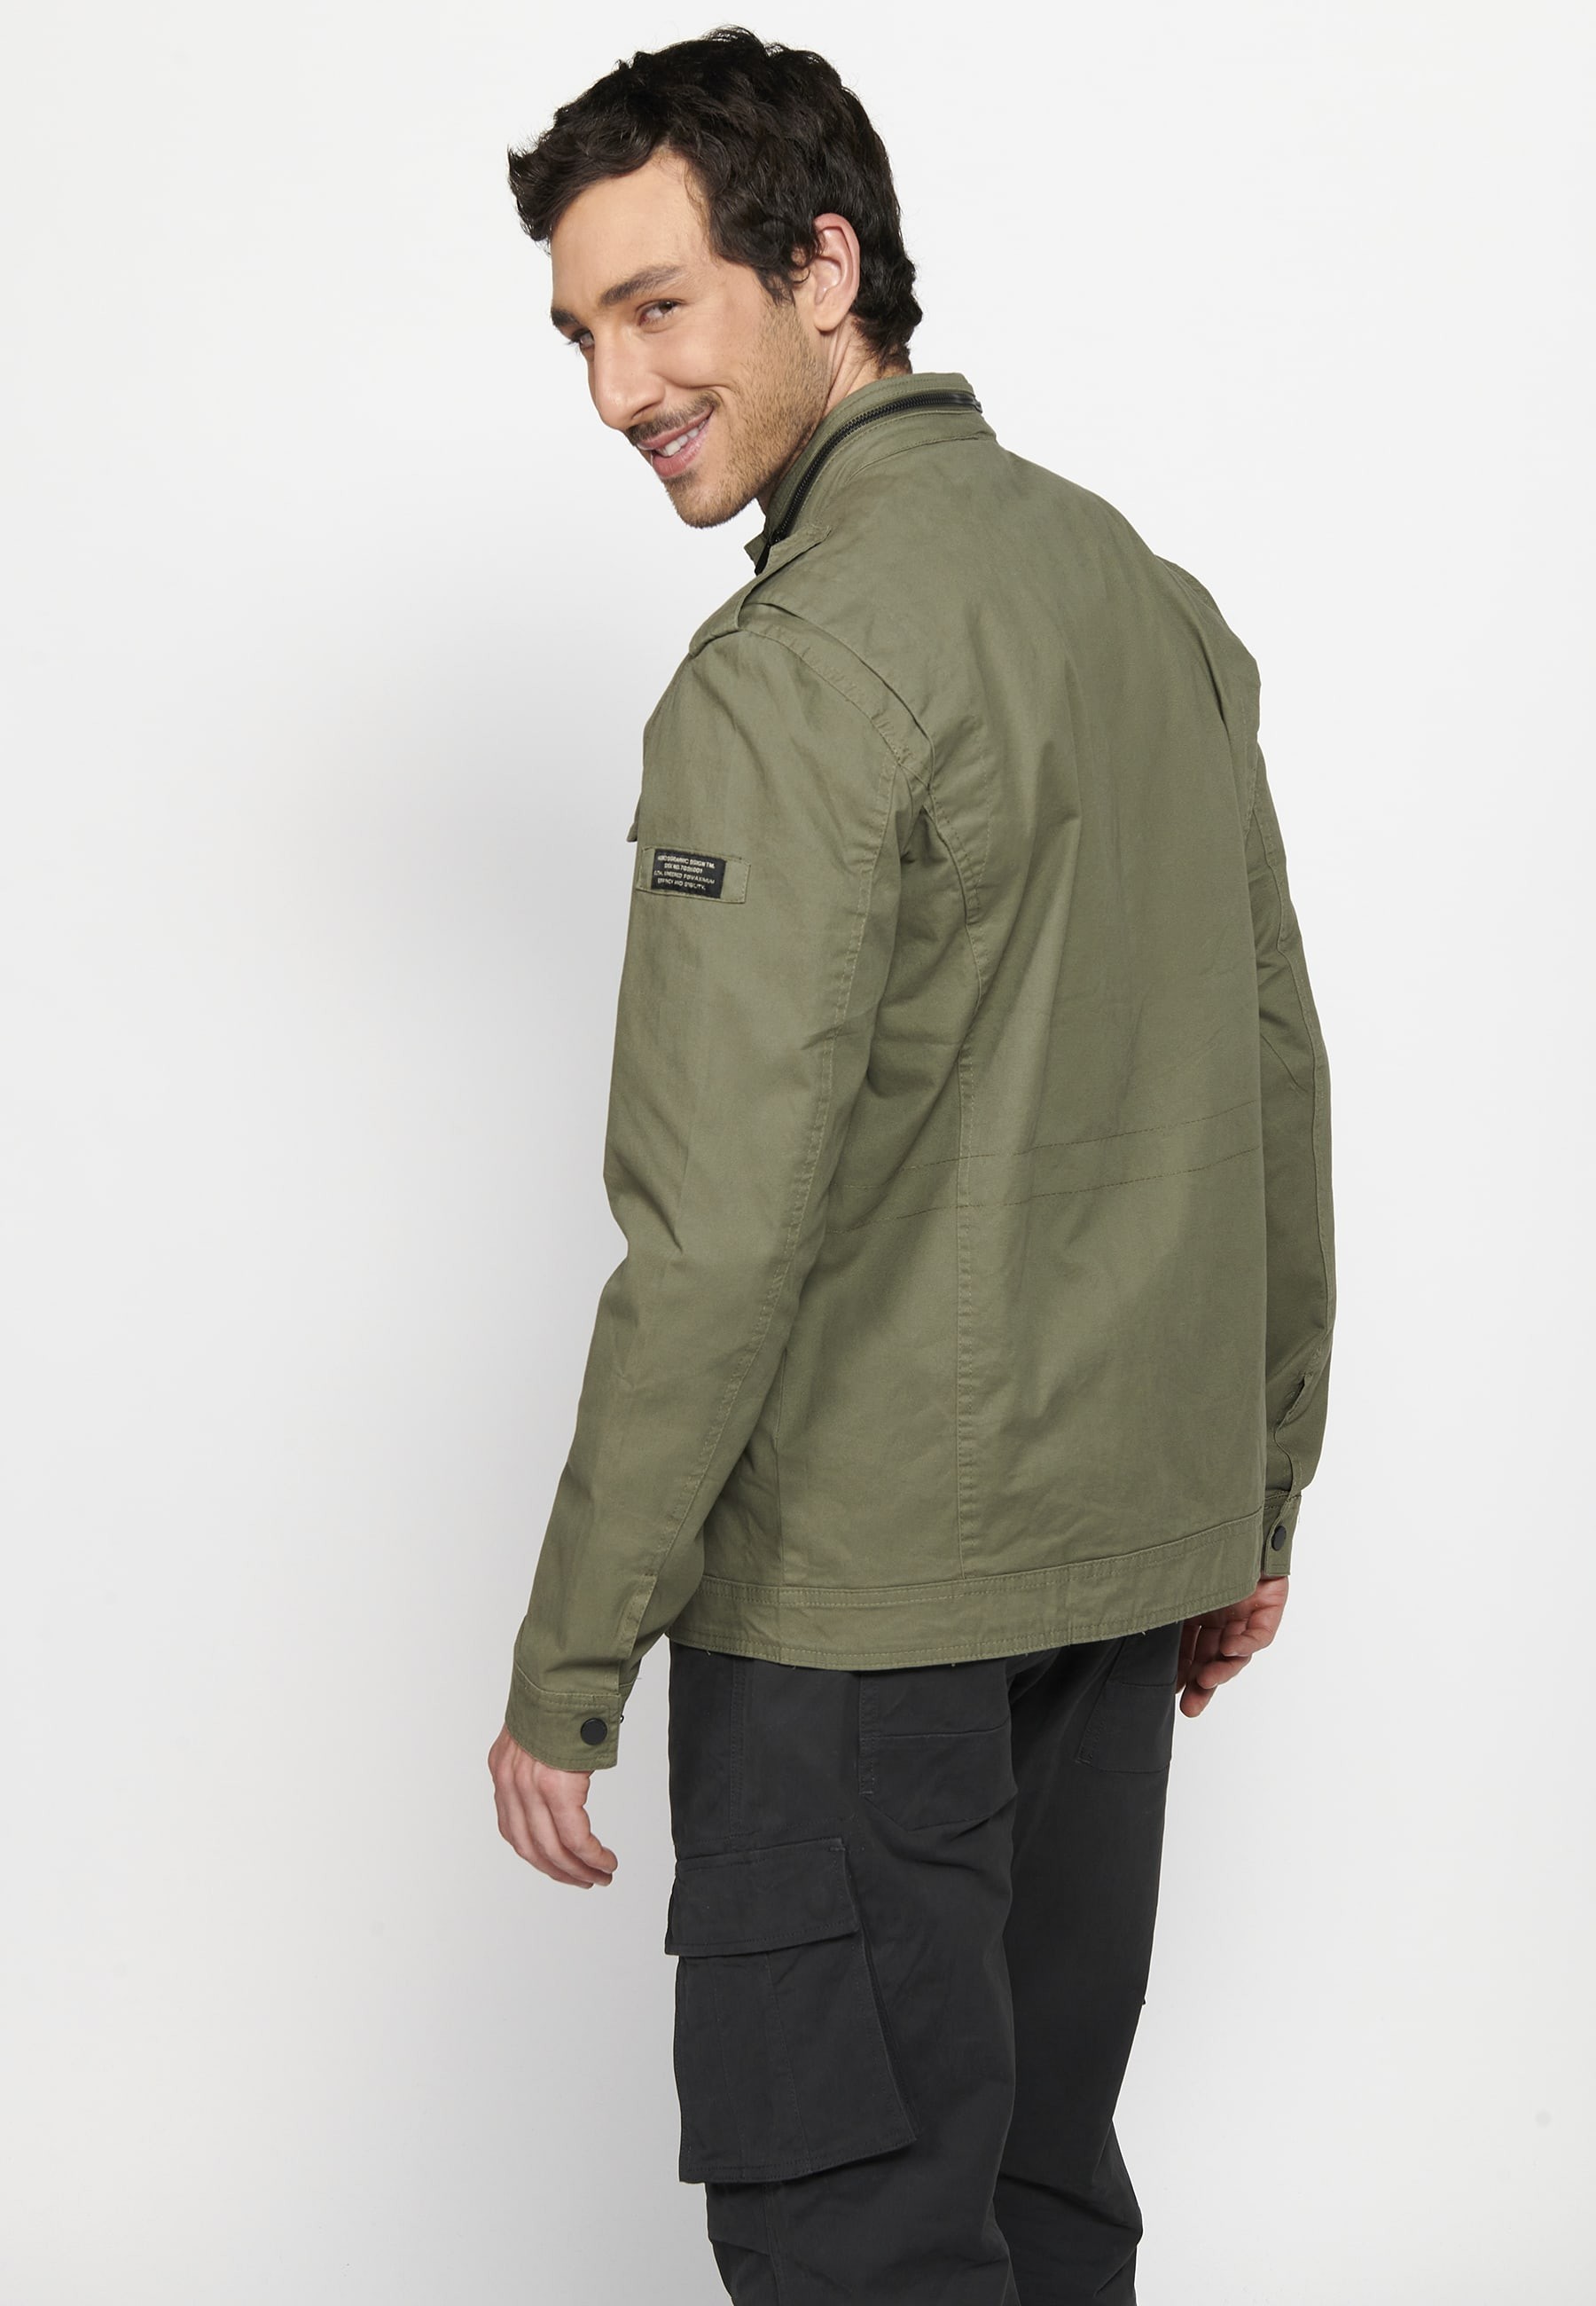 Long Sleeve Jacket with High Neck and Front Zipper Closure with Green Pockets for Men 6